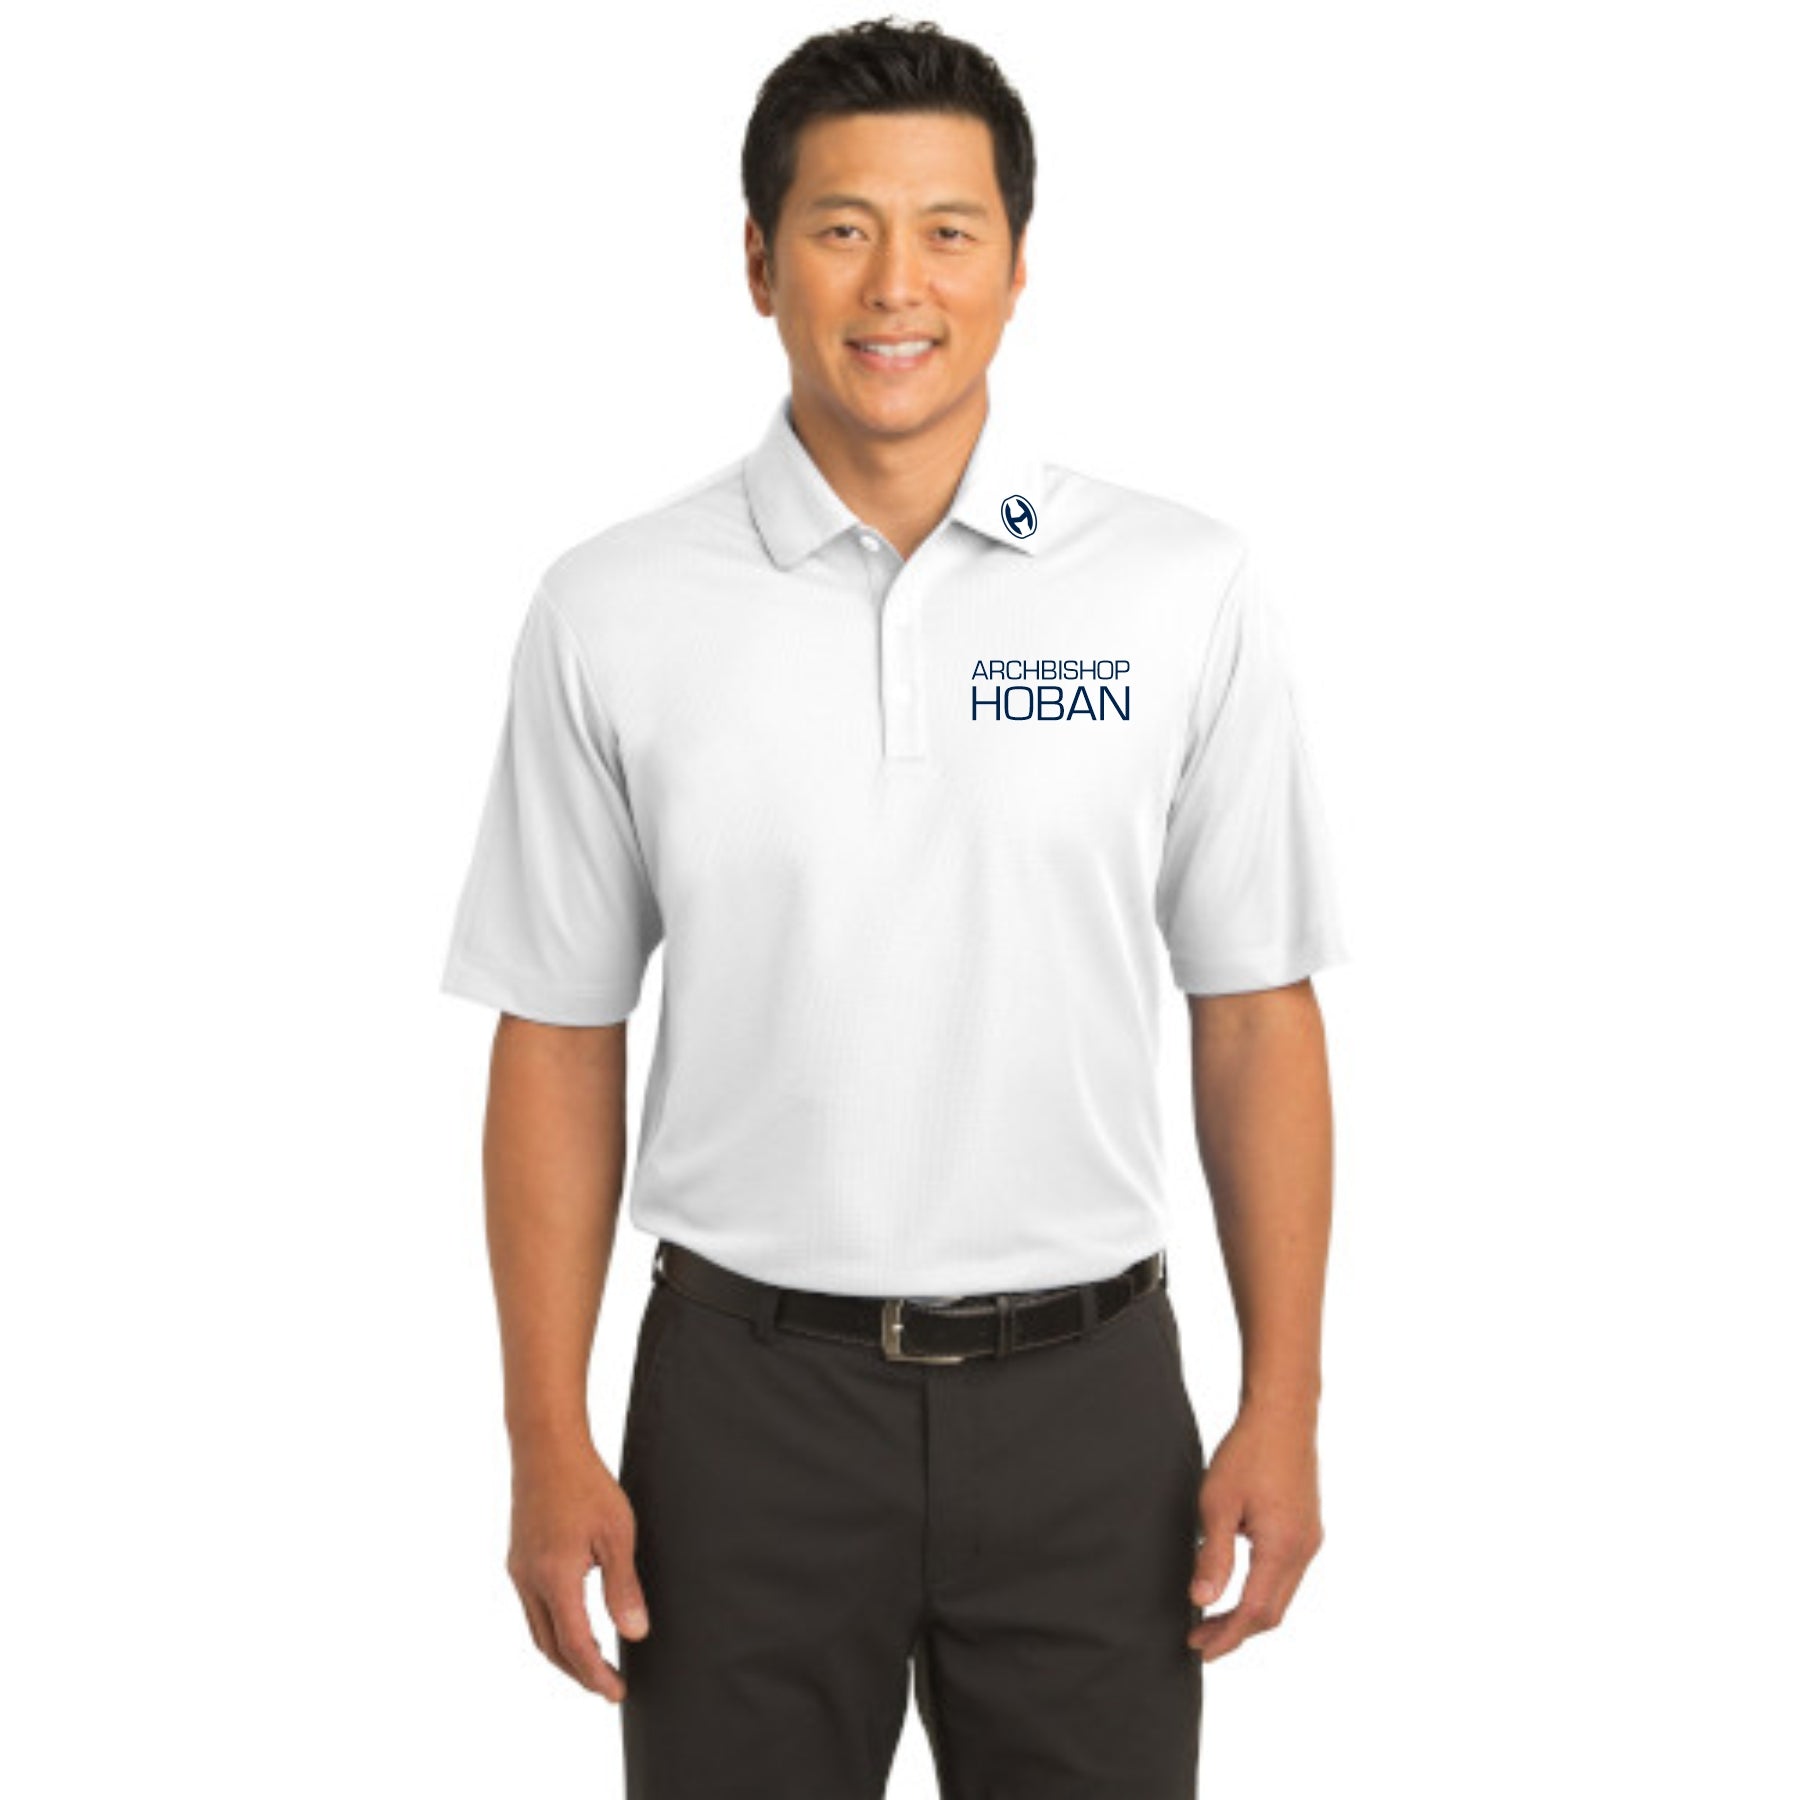 Unisex Tech Sport Dri-FIT Polo Shirt by Nike (click for more color options)